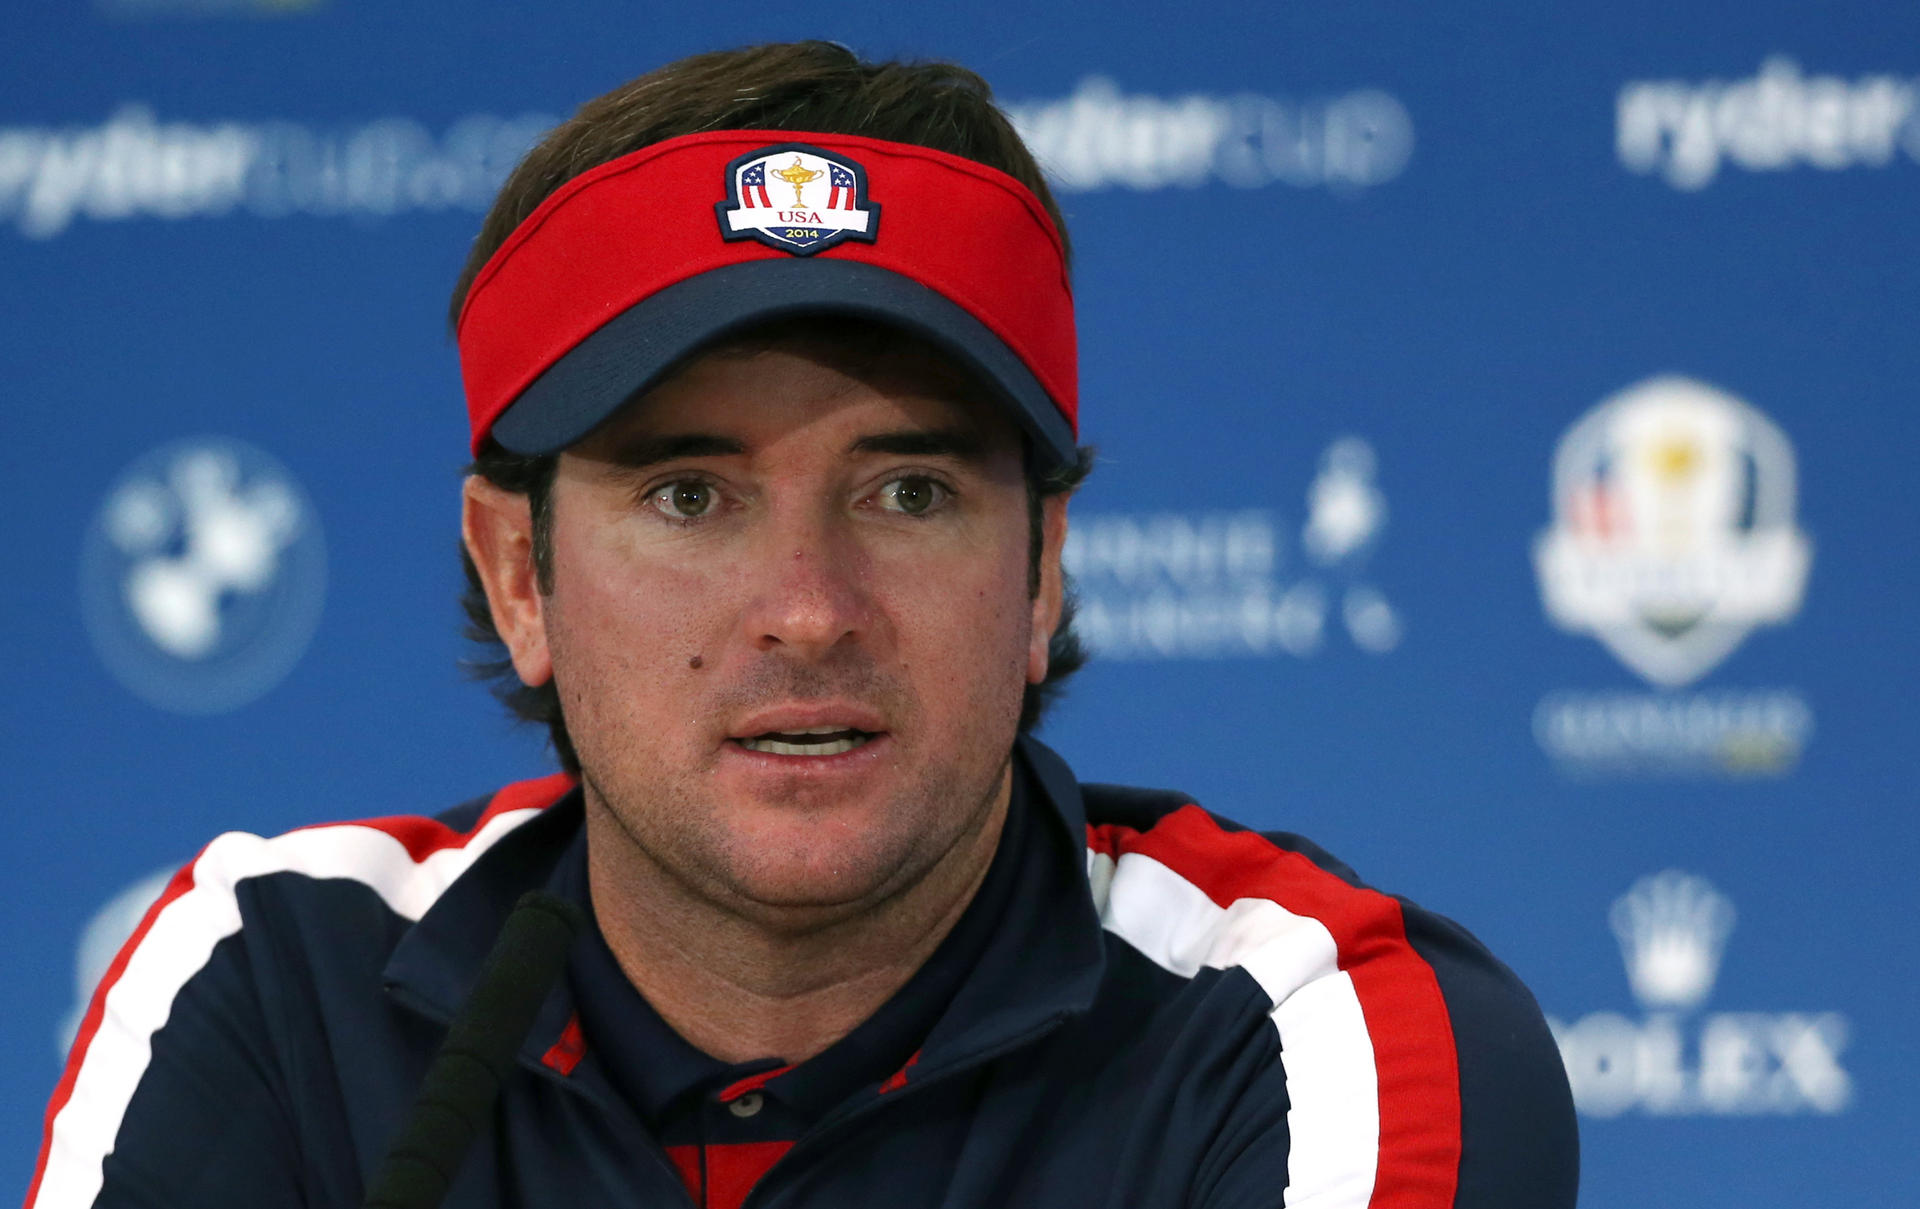 US star Bubba Watson will be the player the Europeans would want to beat the most at the Ryder Cup. Photo: AP